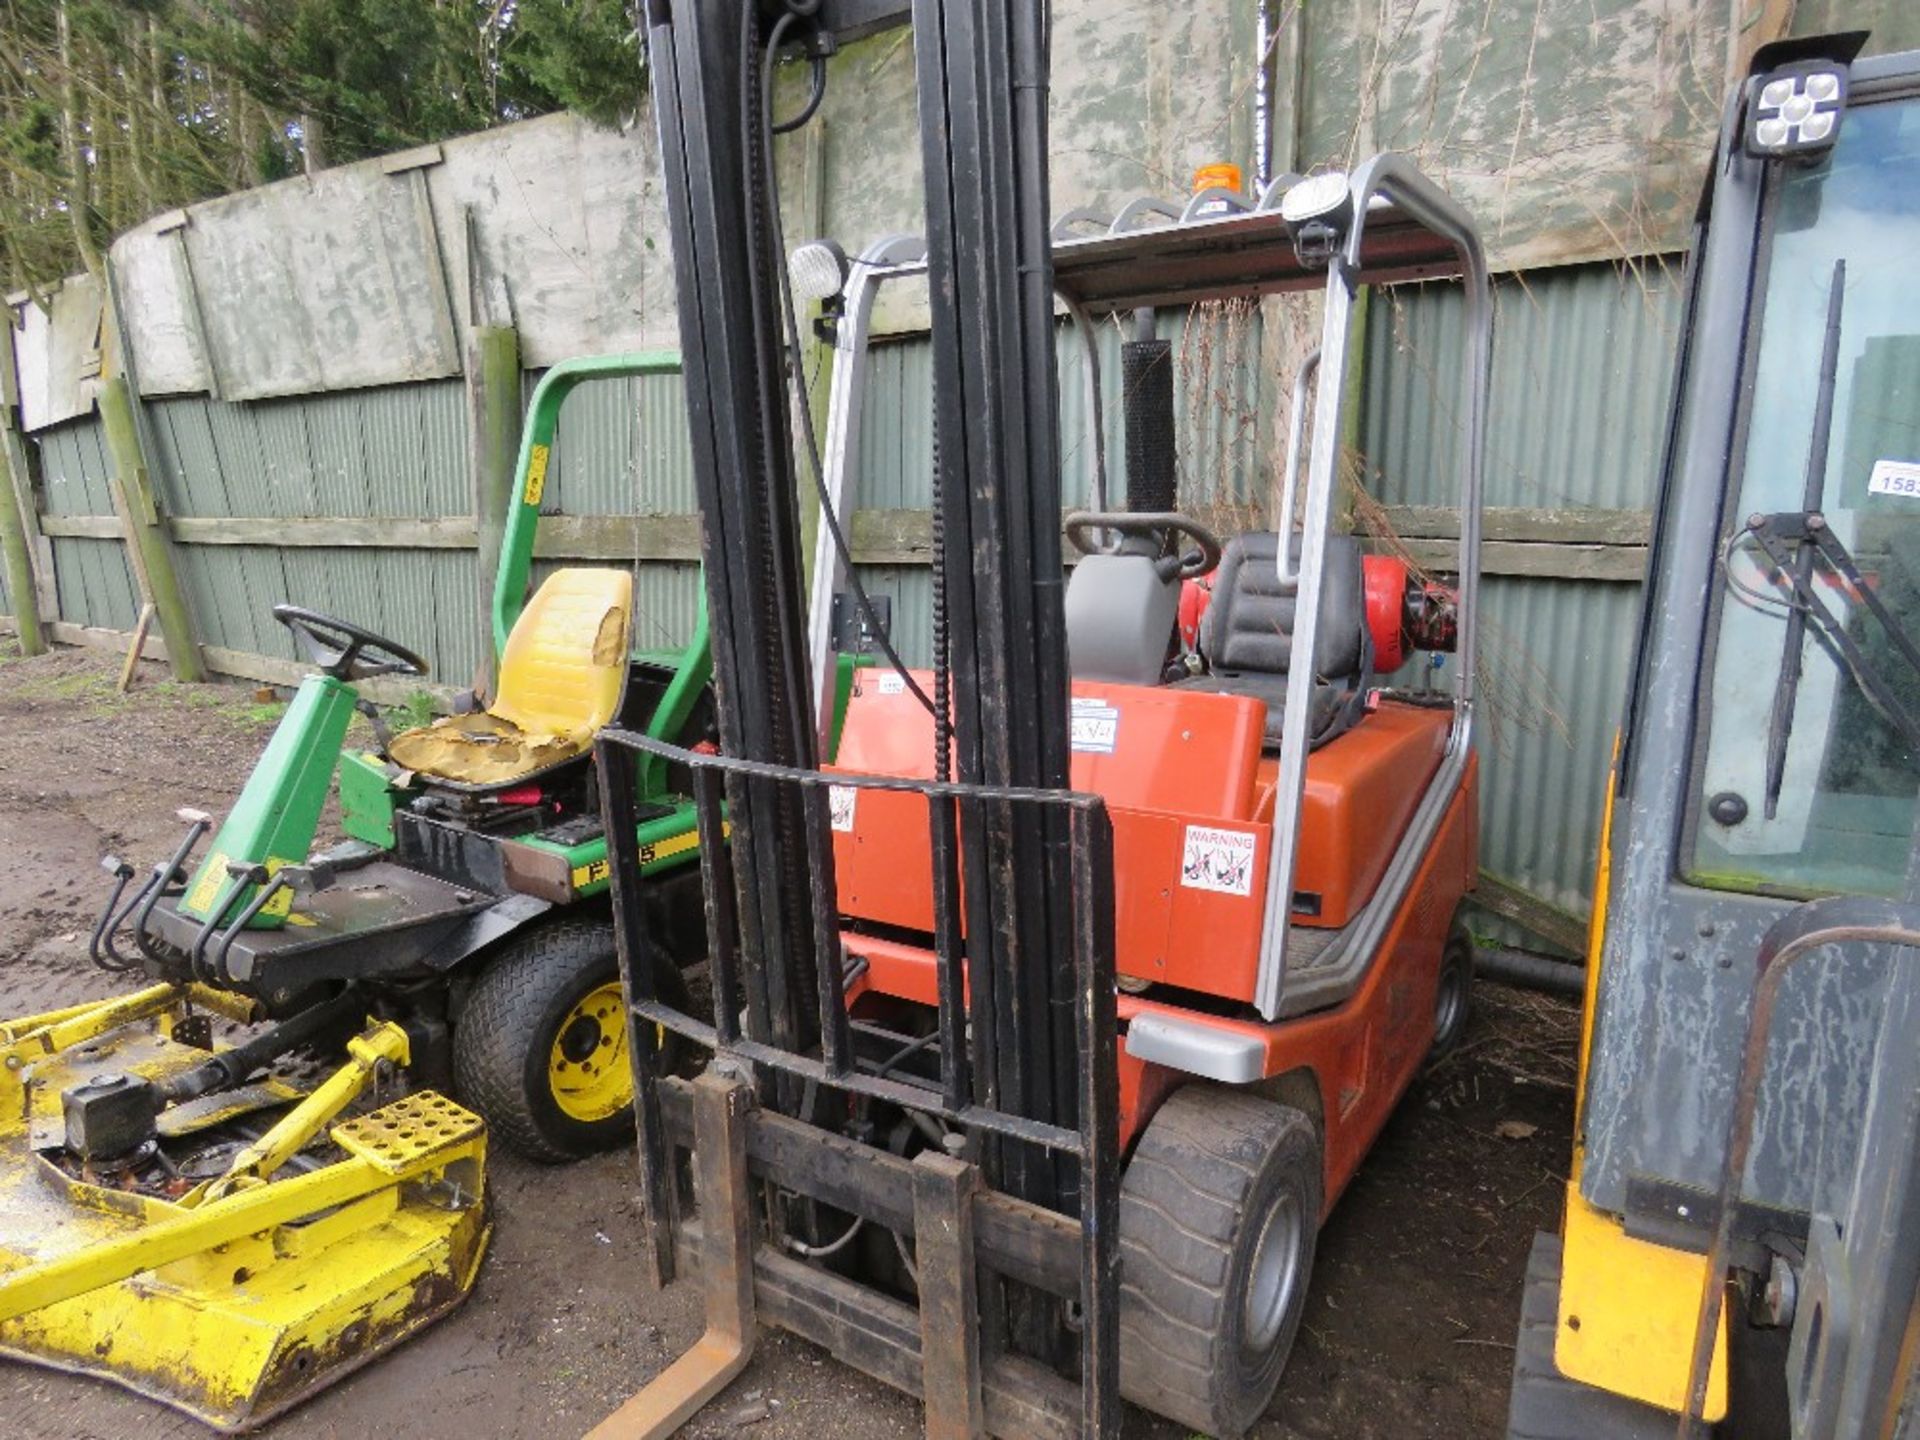 BT CARGO GAS POWERED FORKLIFT TRUCK, 3 TONNE RATED CAPACITY APPROX. 5154 REC HRS. SN:CE289098. - Image 5 of 14